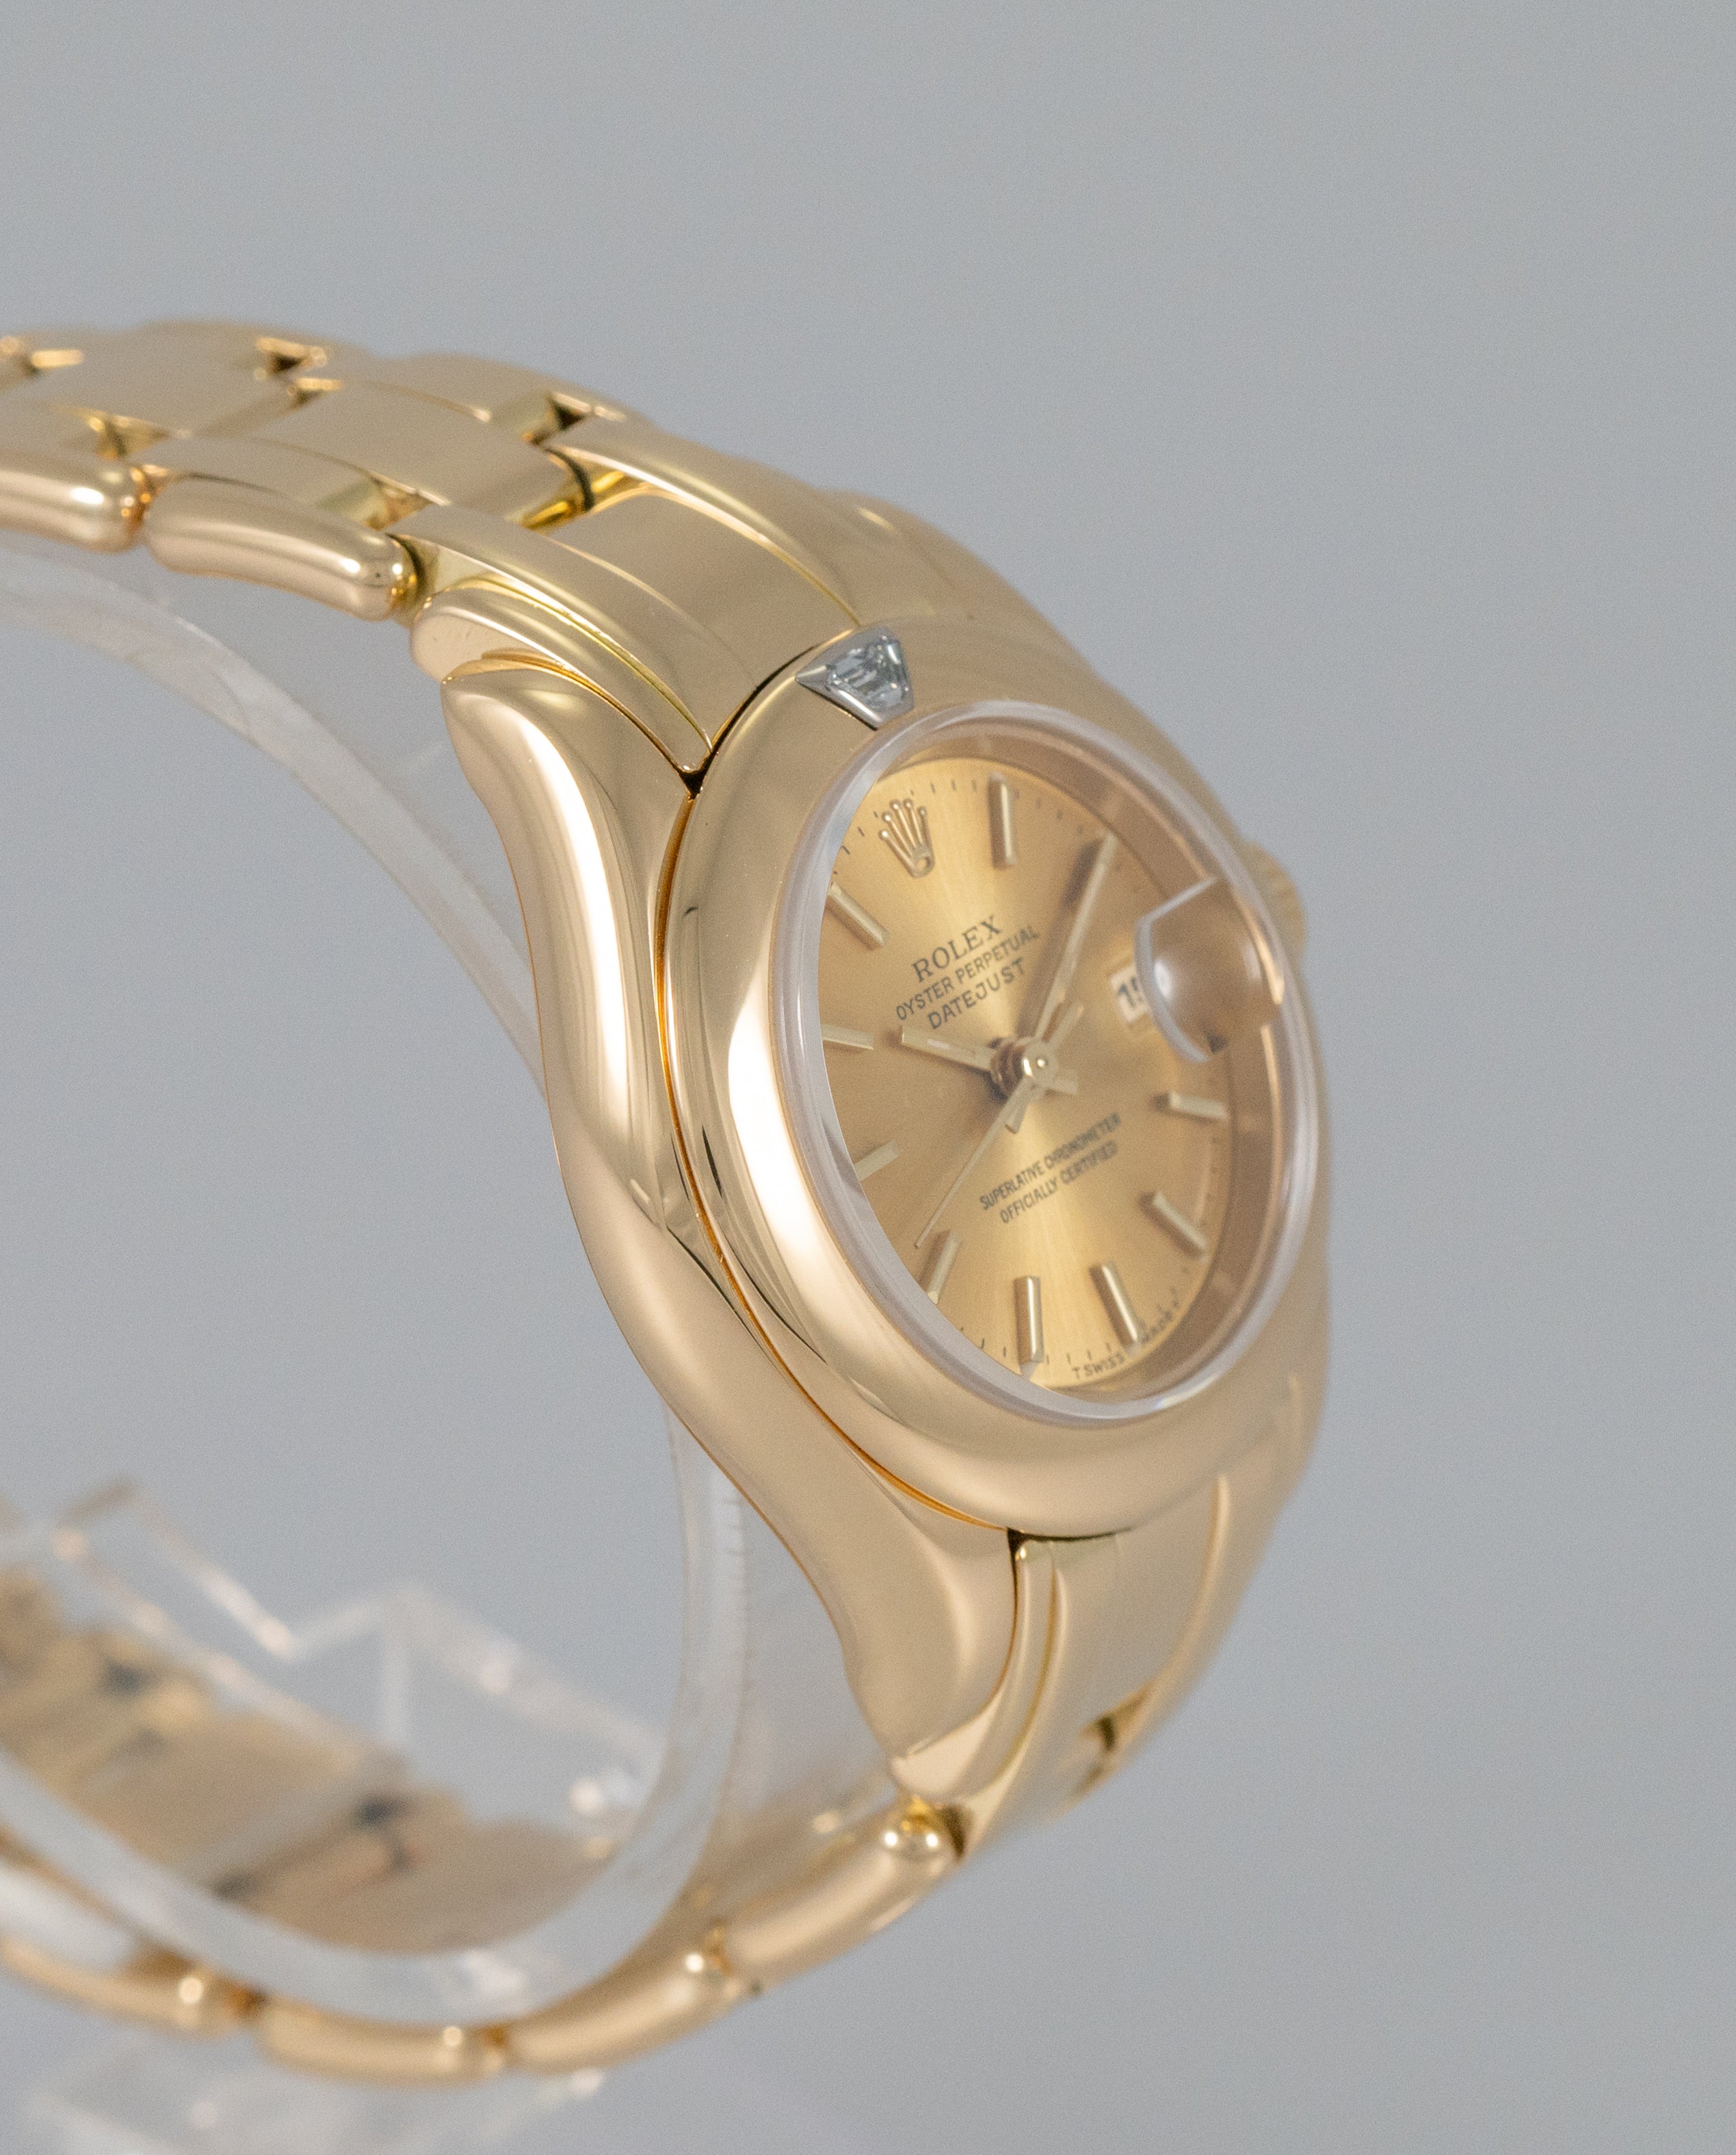 Rolex Datejust Pearlmaster Yellow Gold 18k Ref: 69328